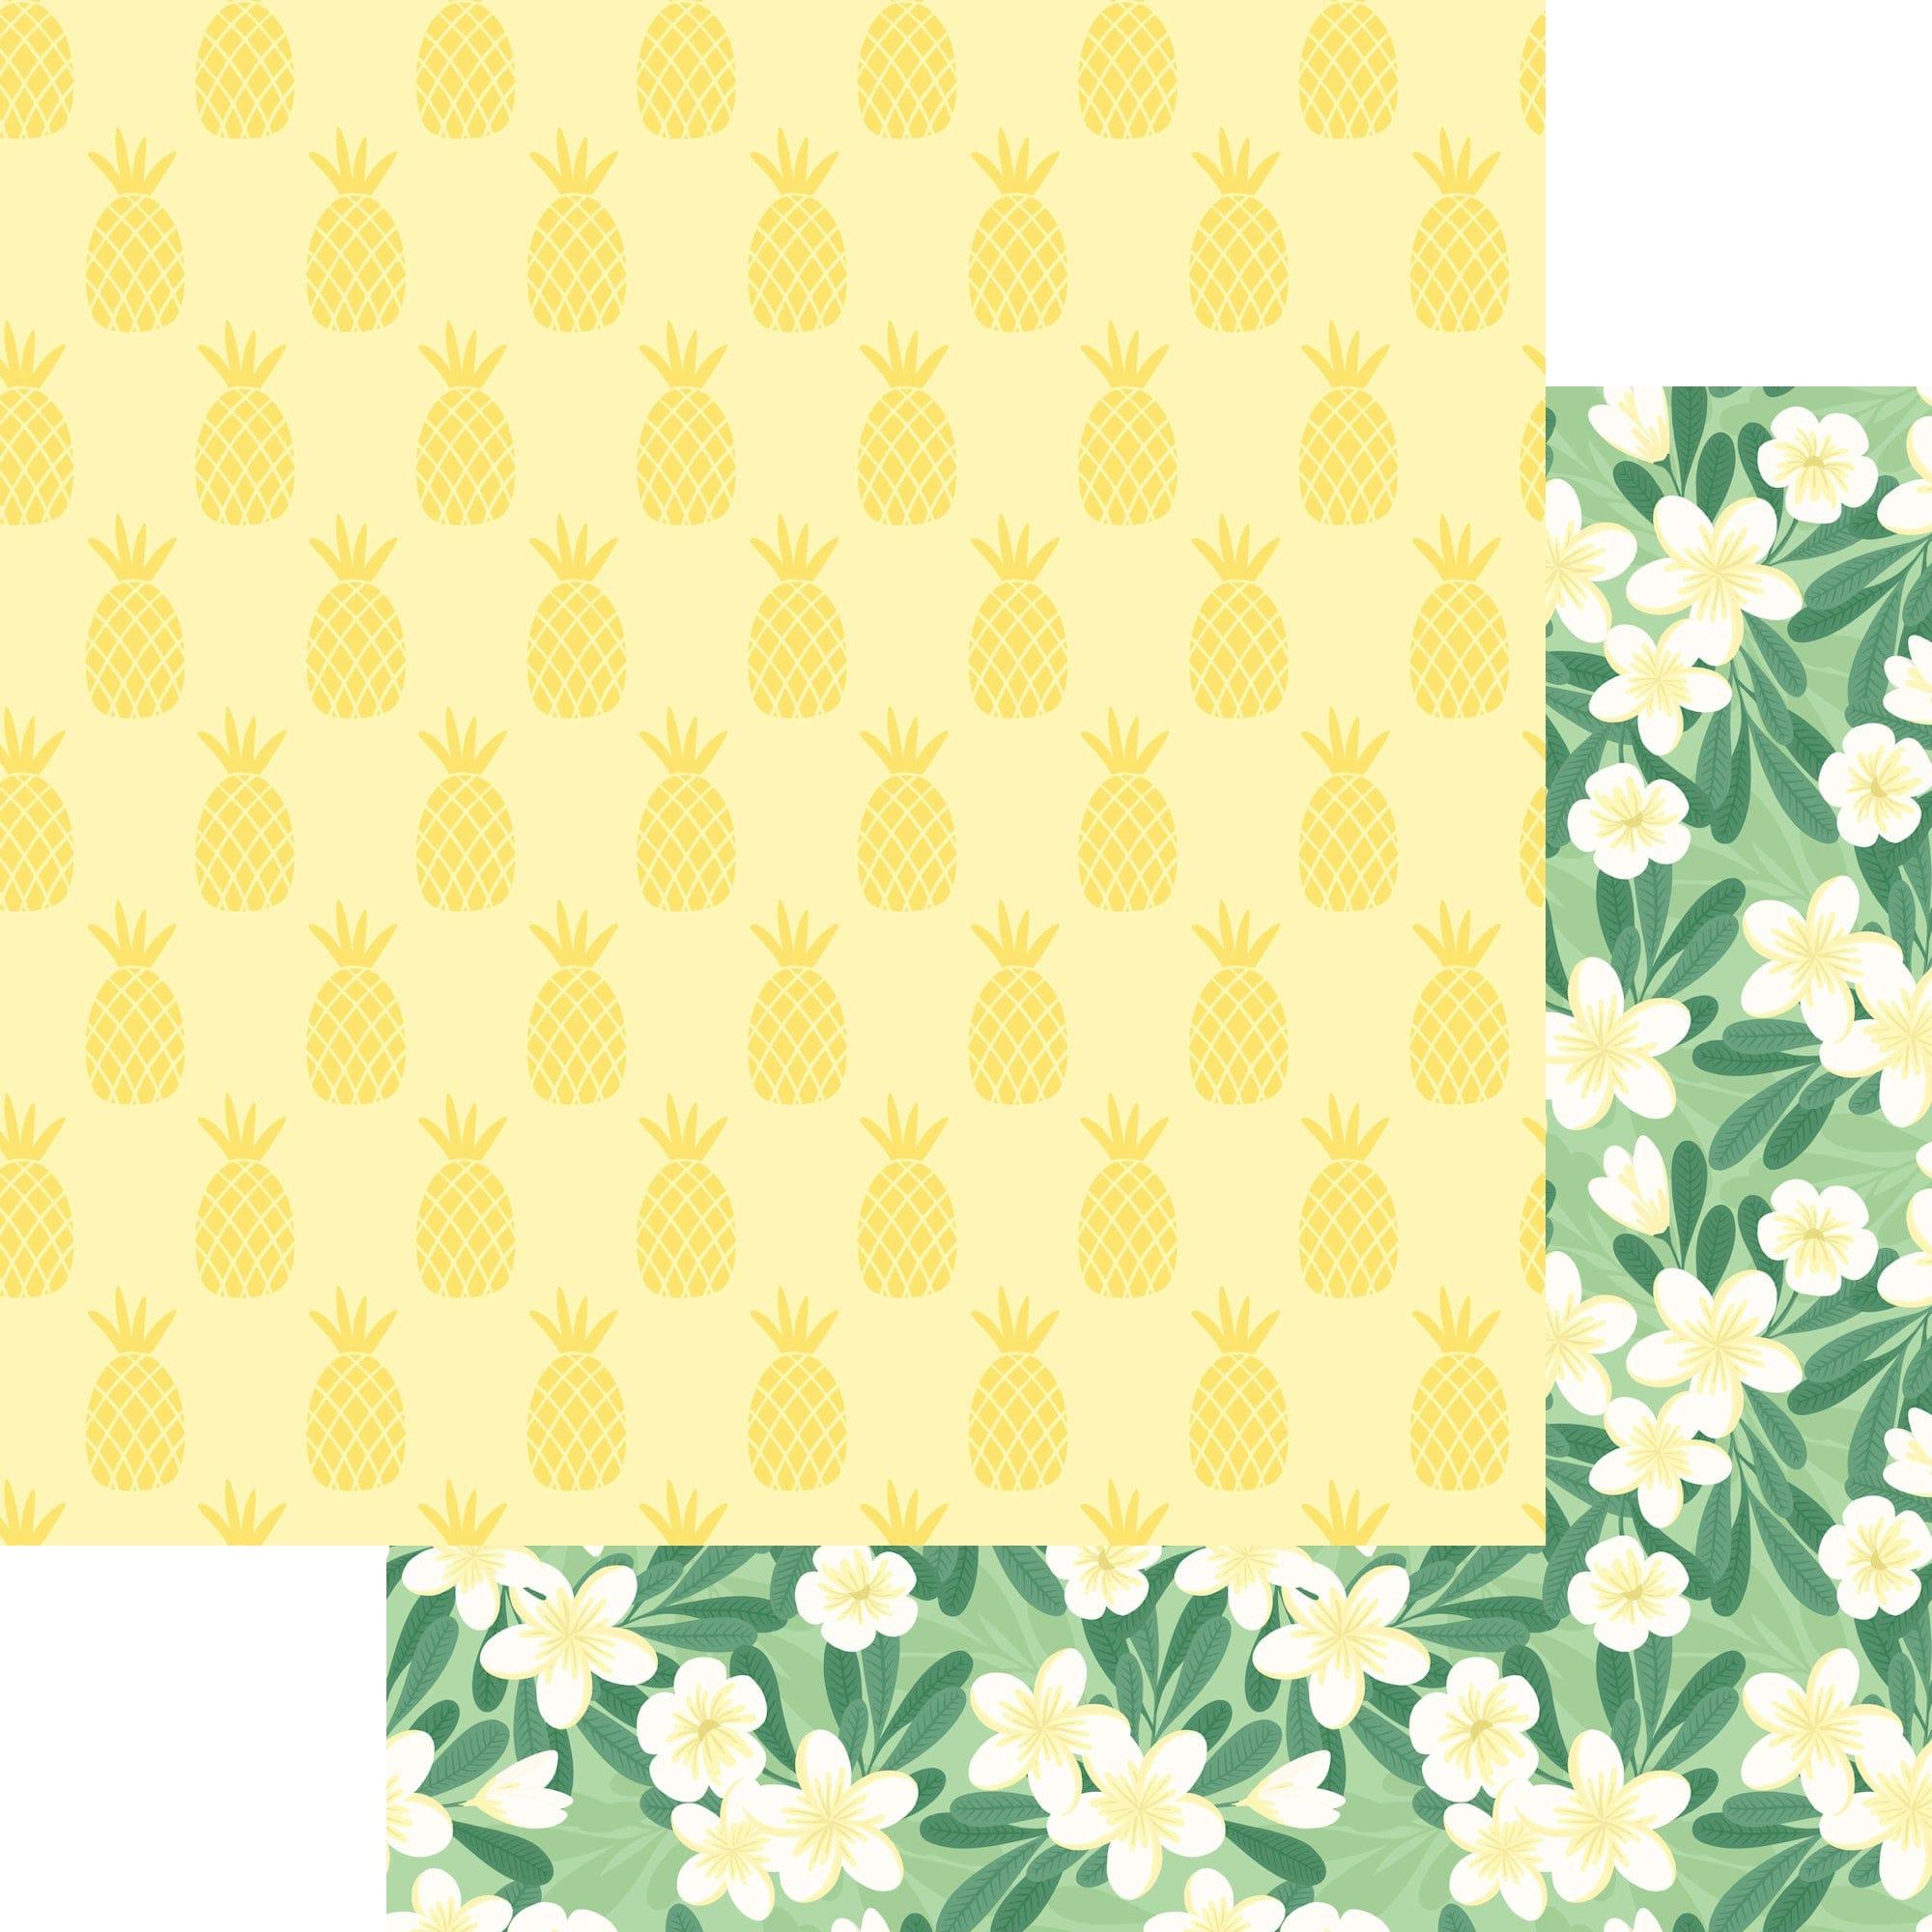 Sunkissed Collection Pineapples 12 x 12 Double-Sided Scrapbook Paper by SSC Designs - Scrapbook Supply Companies